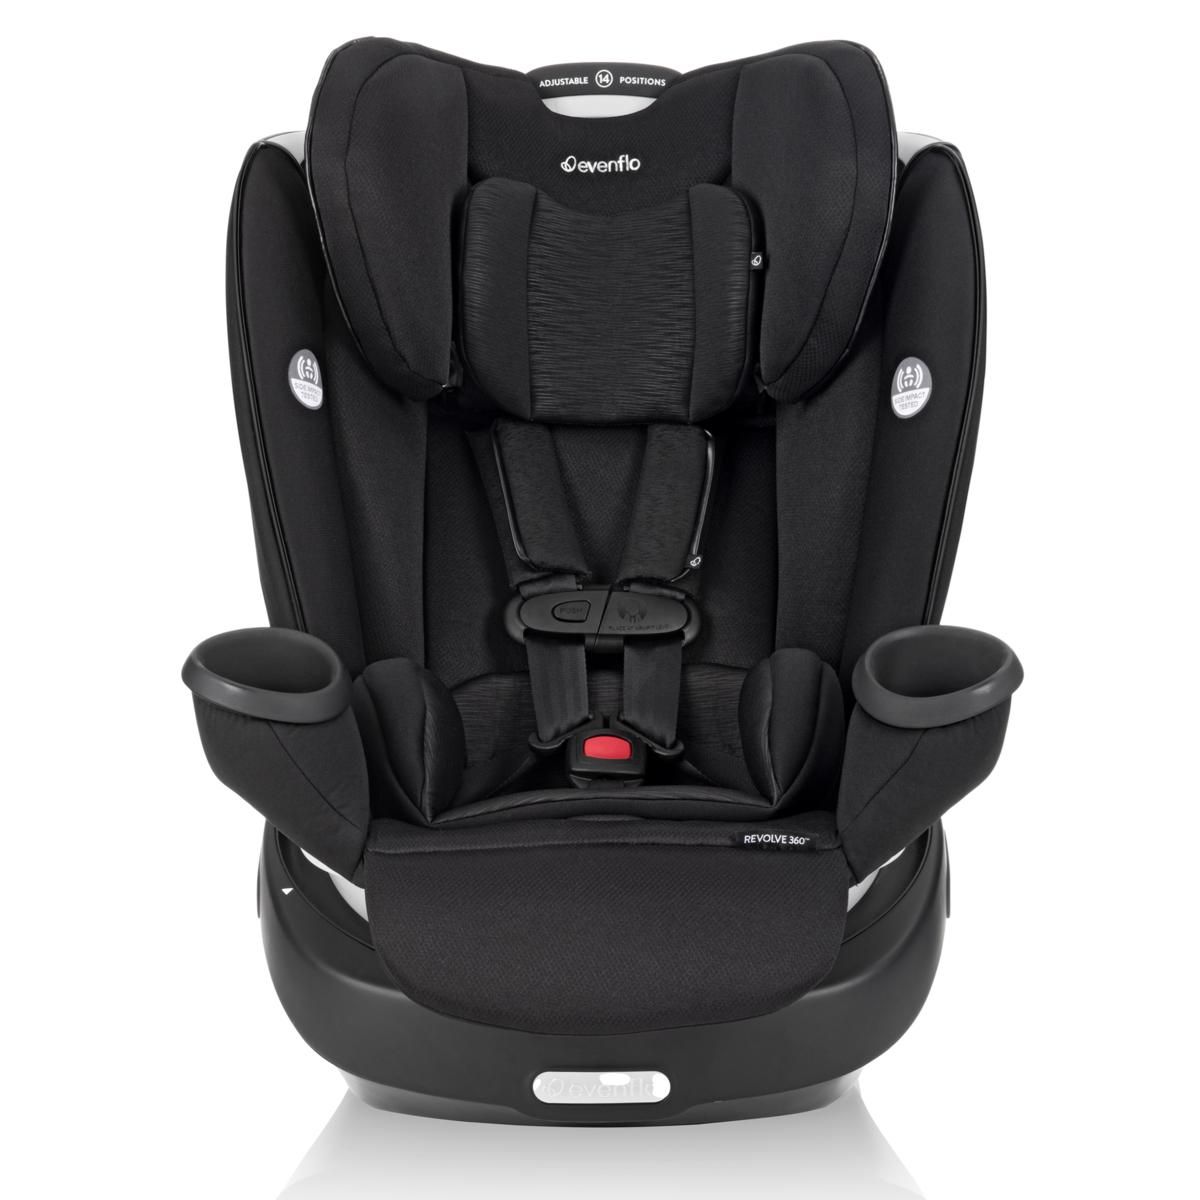 Evenflo GOLD Revolve360 All-In-One Convertible Car Seat | HSN